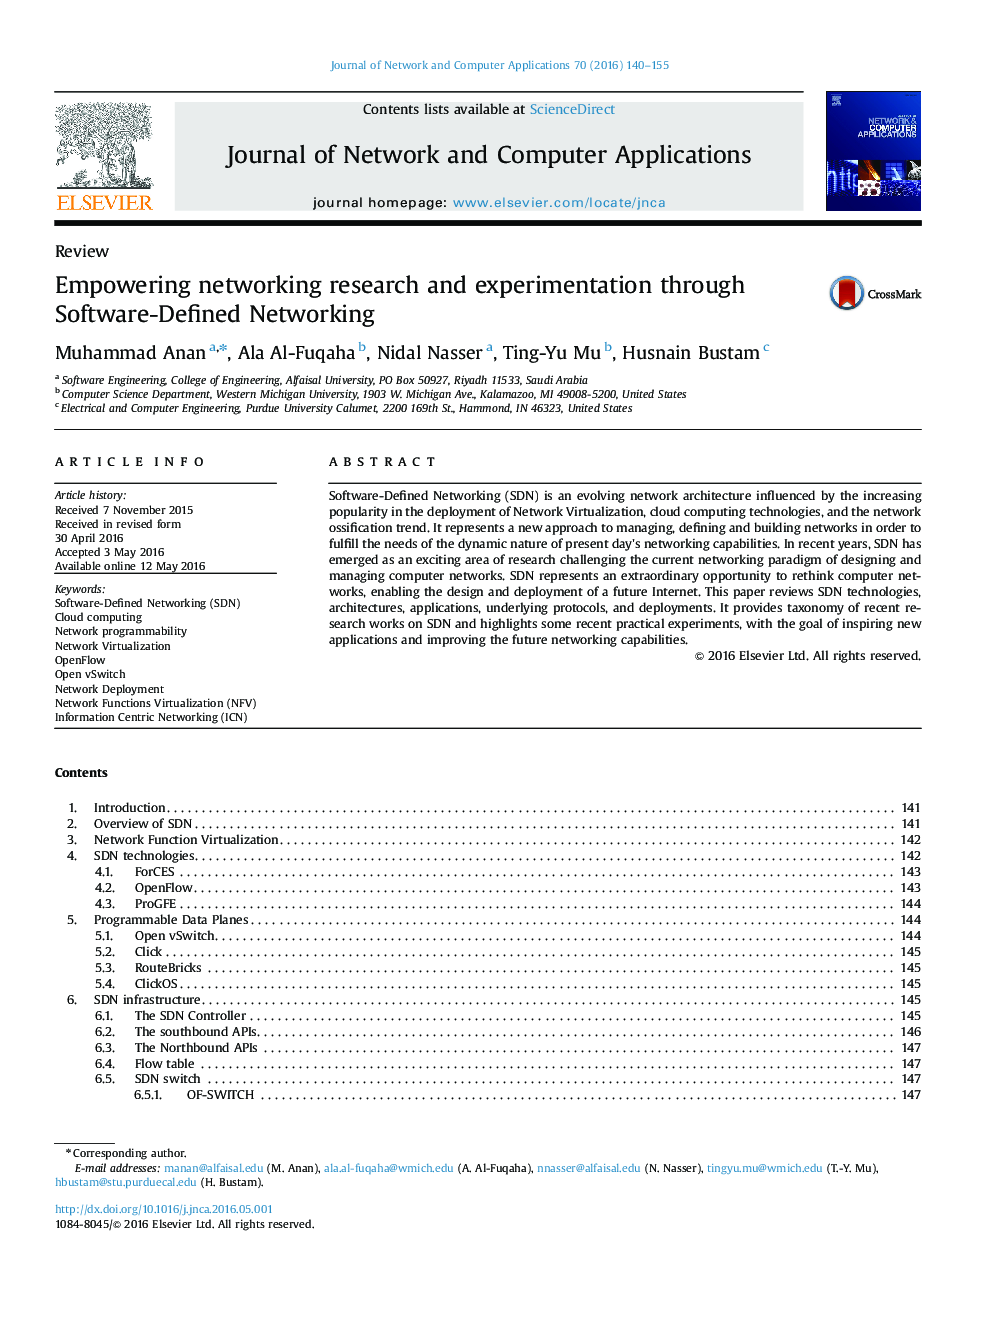 Empowering networking research and experimentation through Software-Defined Networking